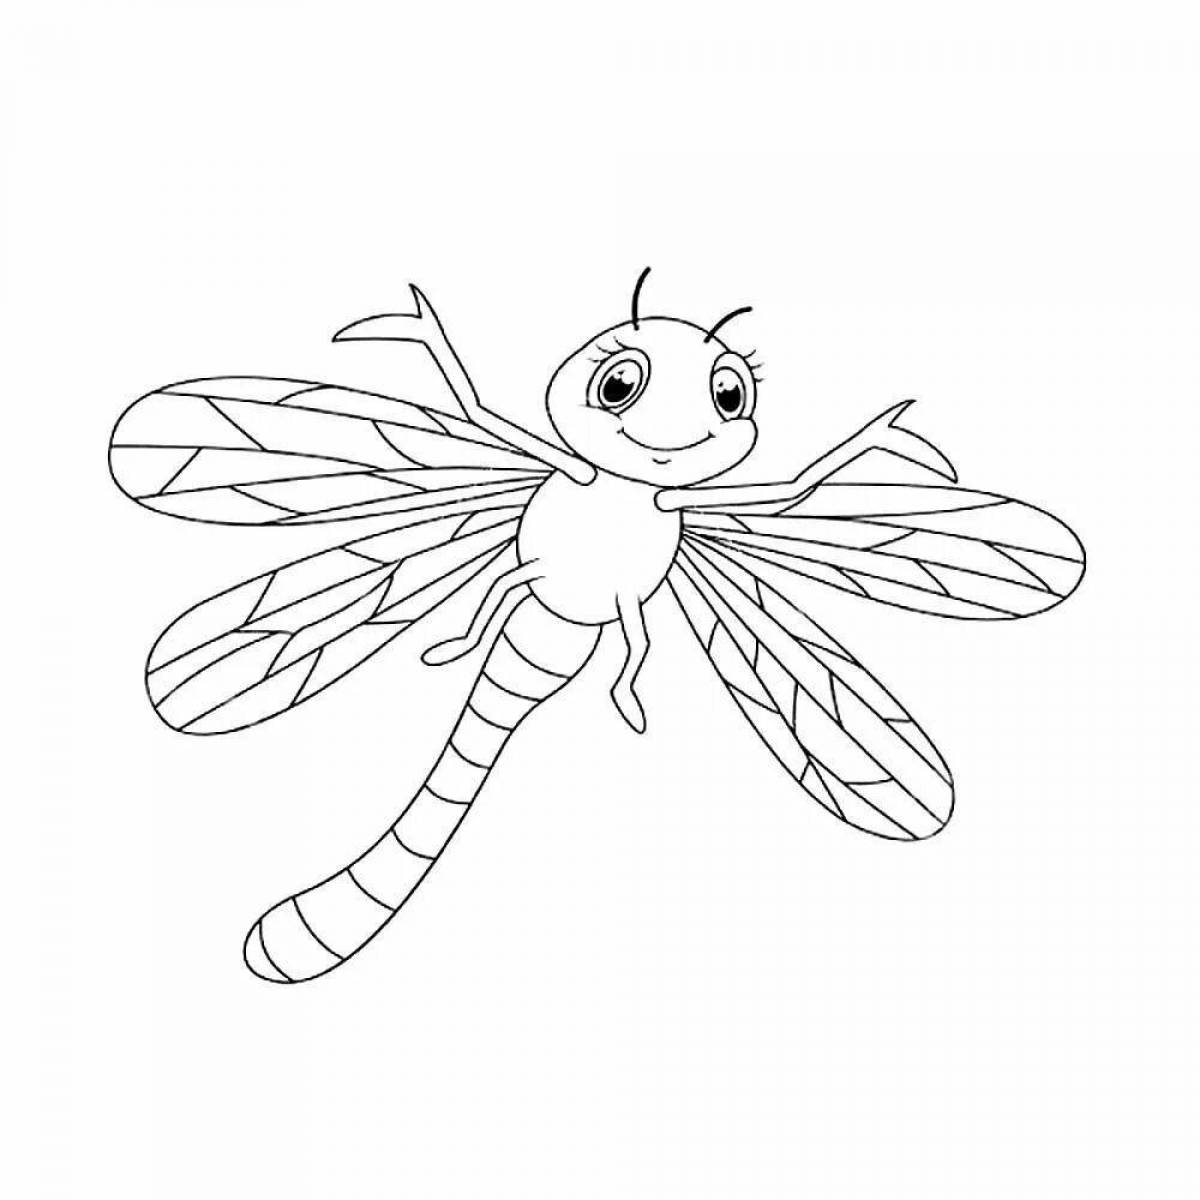 Dazzling dragonfly coloring pages for kids